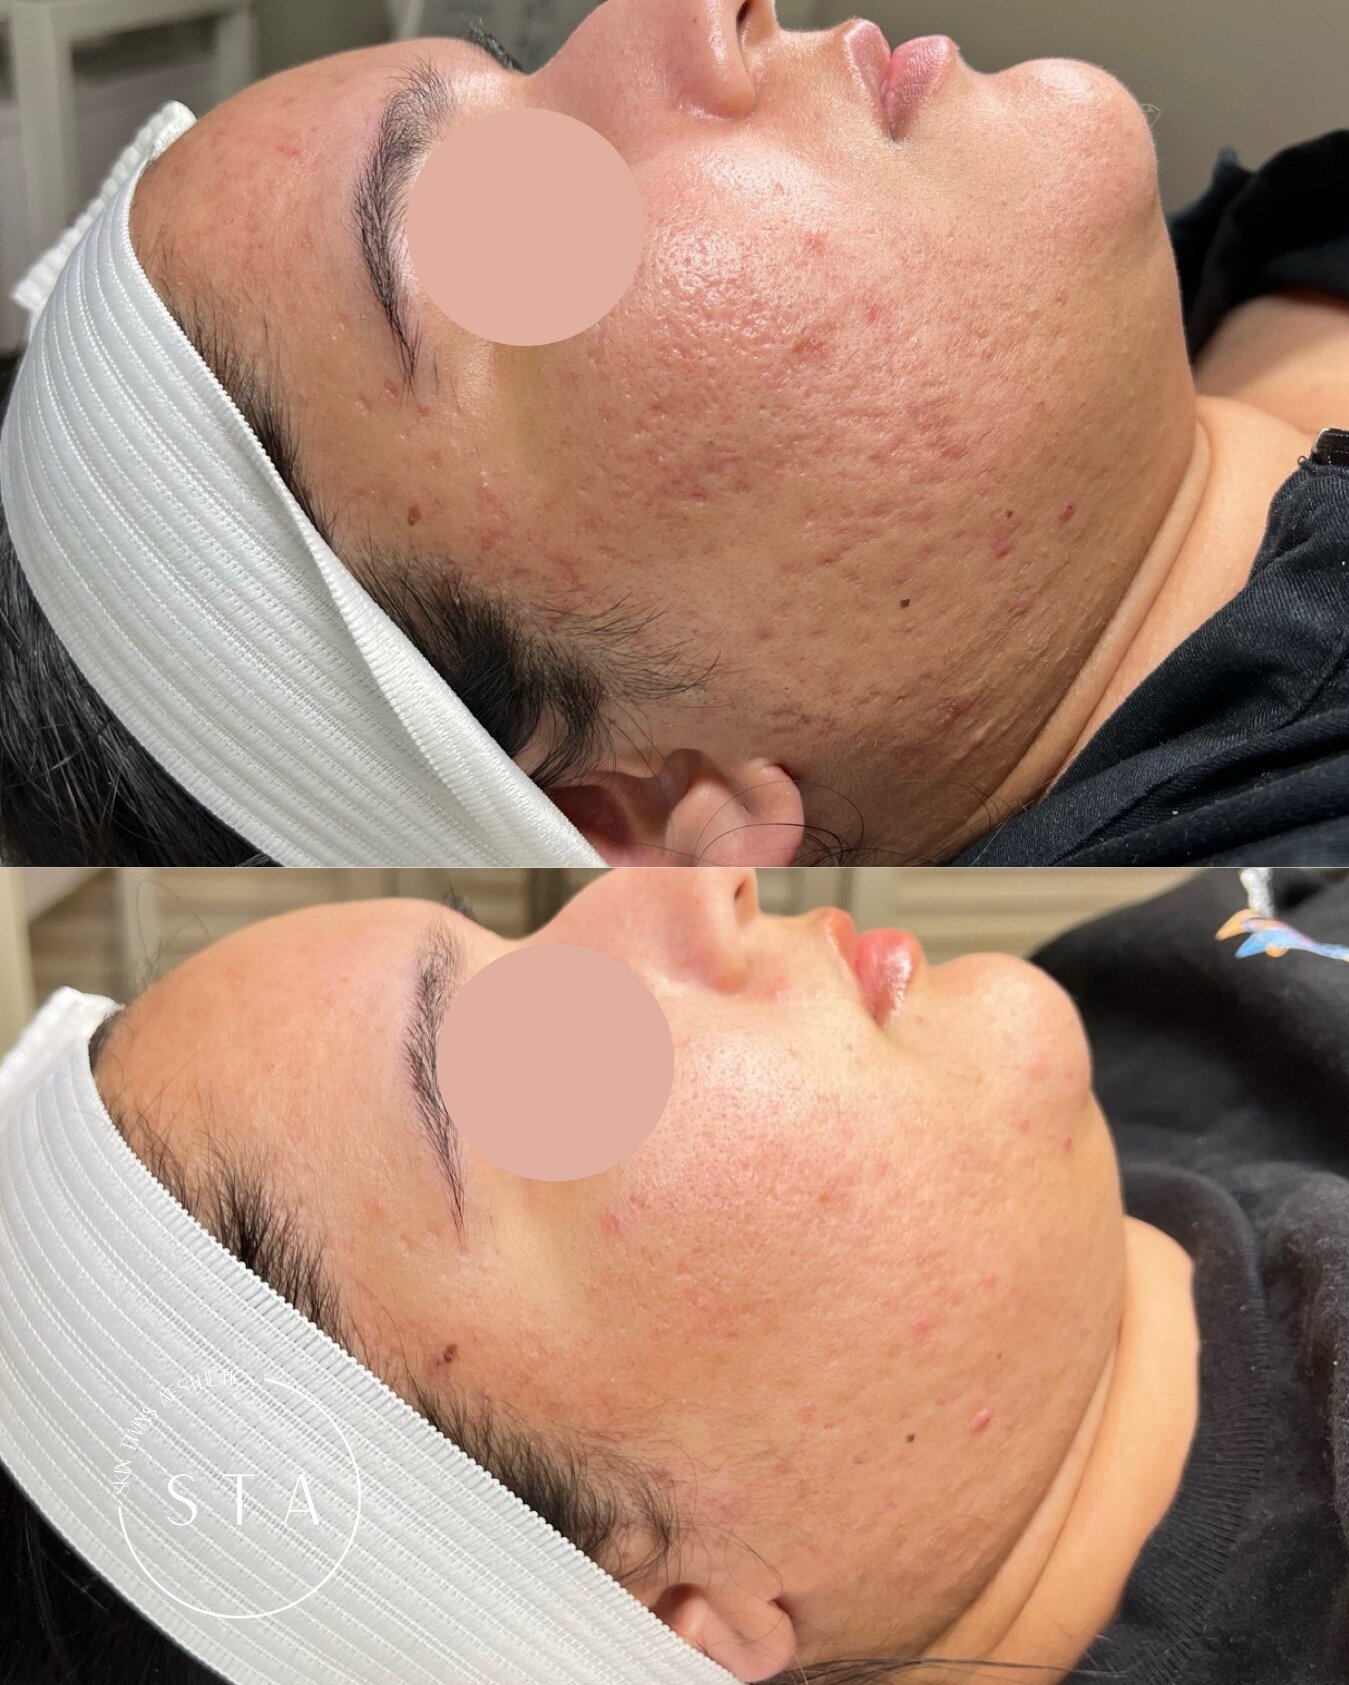 One of my Acne Bootcamp clients after only TWO SkinPen Microneedling sessions! The improvement after only two sessions has me so excited for what's to come.  Check out her very first before photo posted in September to see how far we've come. 🩷

Mic